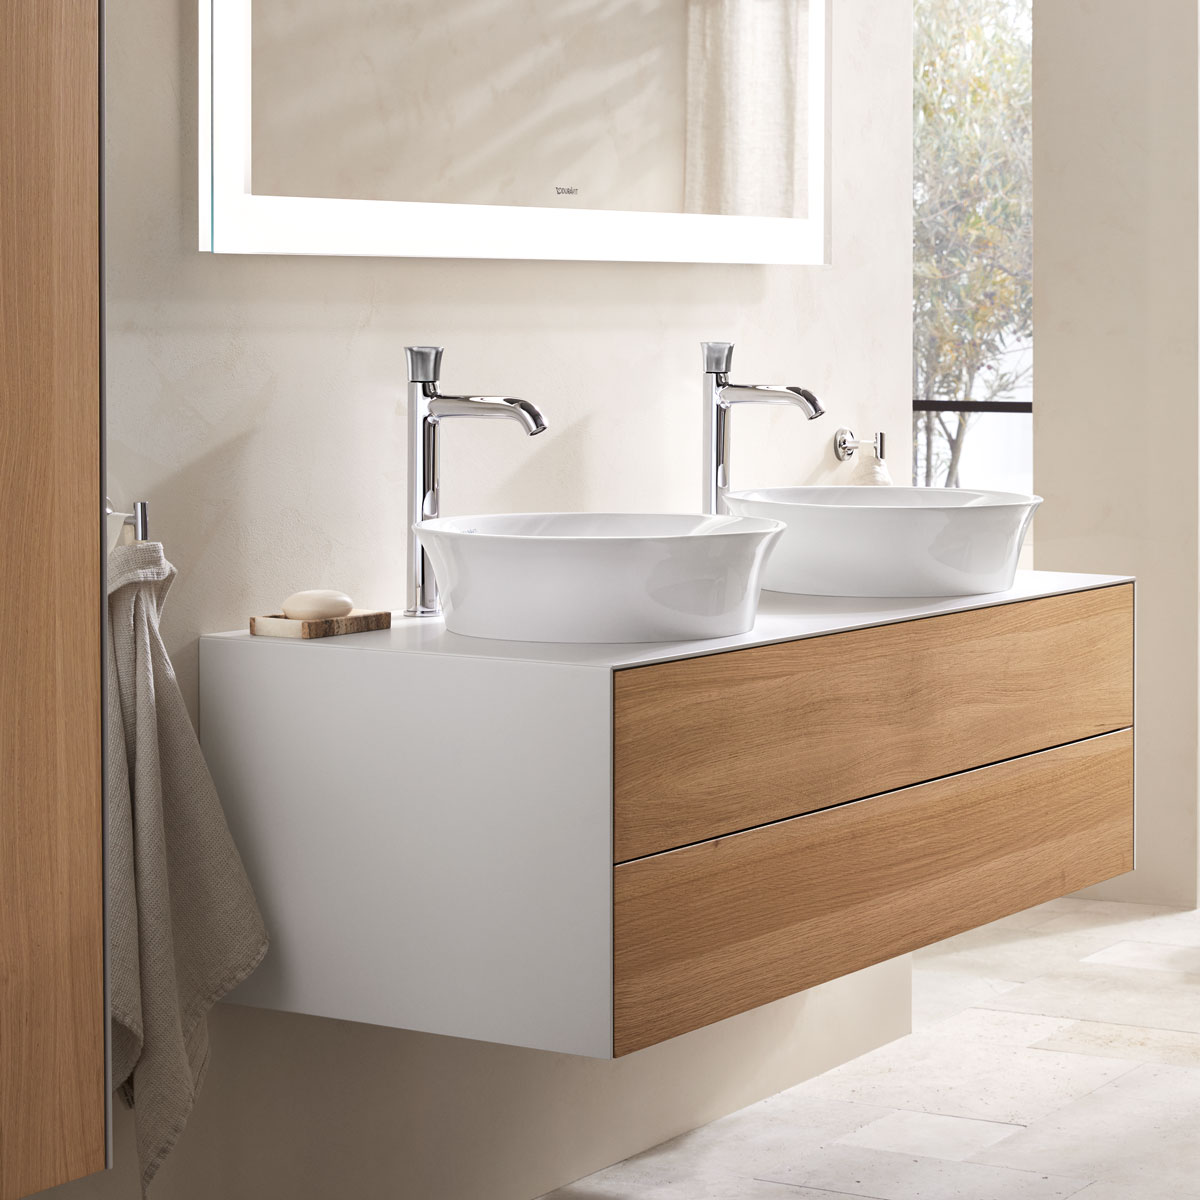 Two White Tulip countertop basins with base cabinet
